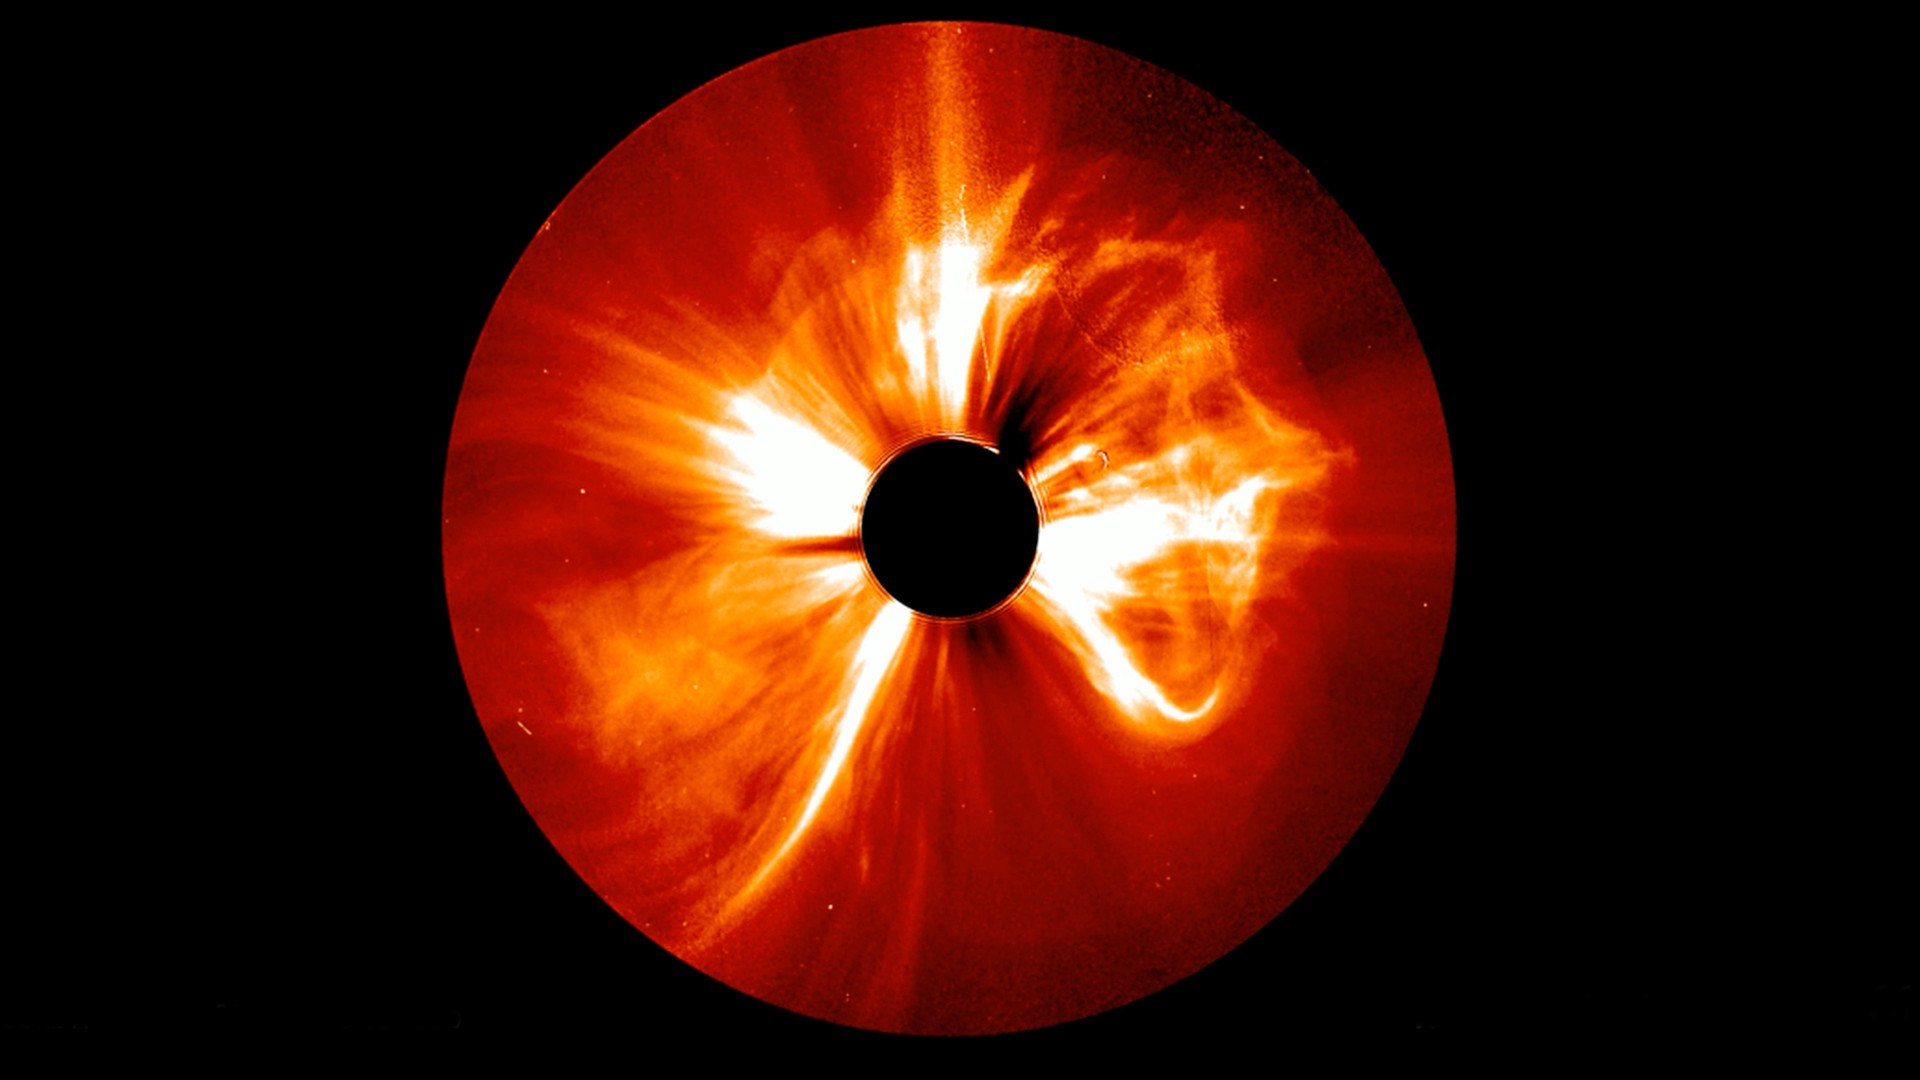 bright white tendrils of light explode outwards from a solid black circle on a red background